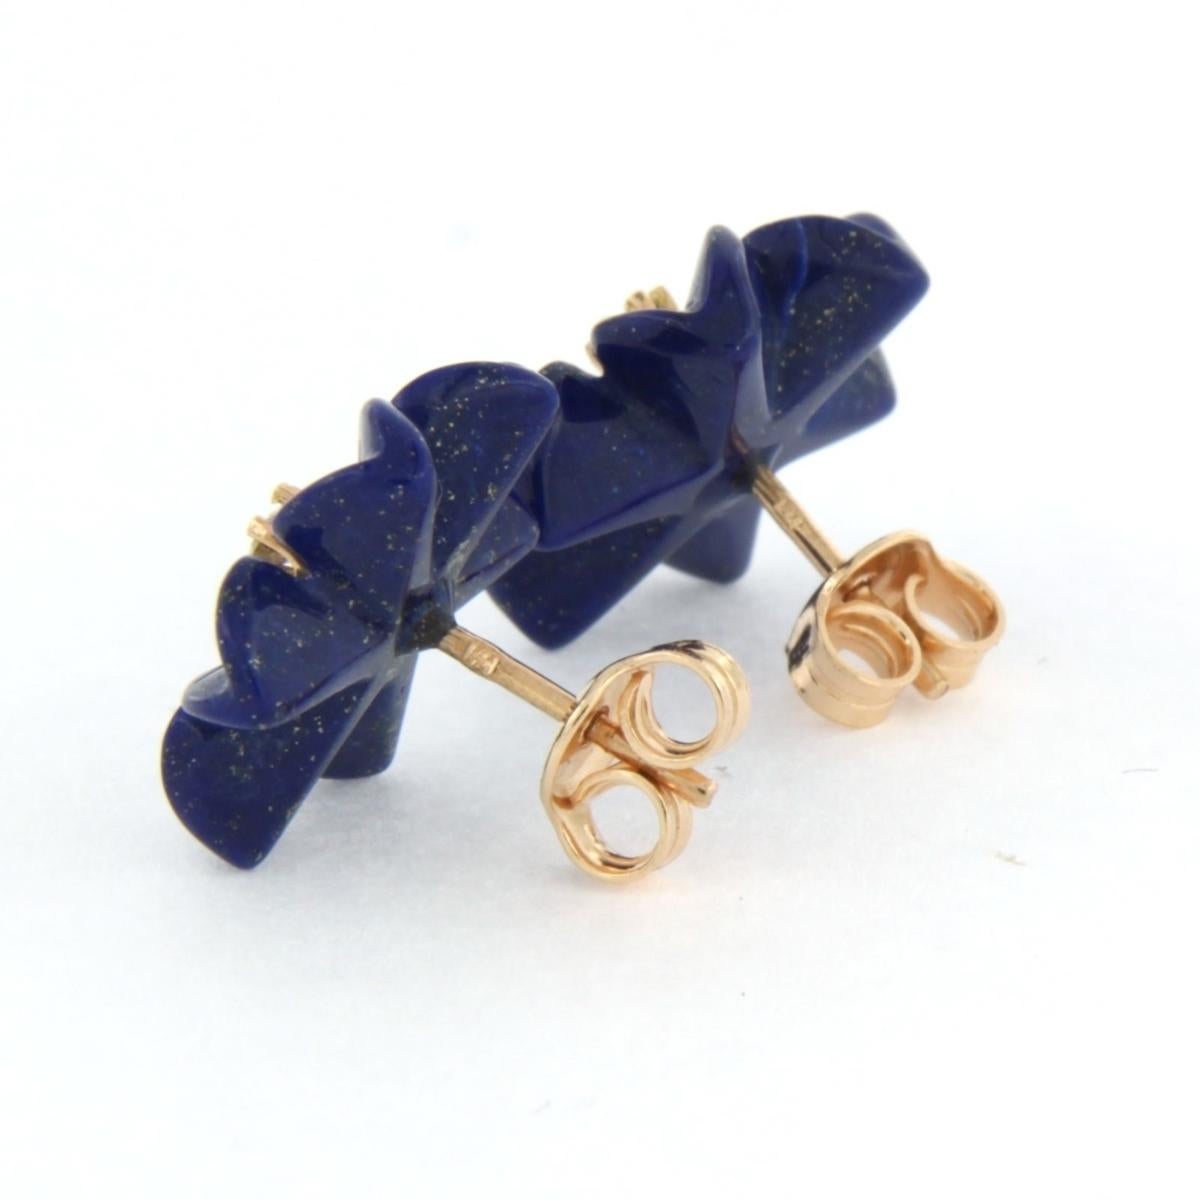 18 kt pink gold ear studs with flower shaped lapis lazuli and brilliant cut diamond 0.08 ct - G/H - VS/SI

detailed description:

the size of the ear stud has a diameter of 1.4 cm

Total weight 2.4 grams

put with

- 2 x 1.5 cm flower shape cut